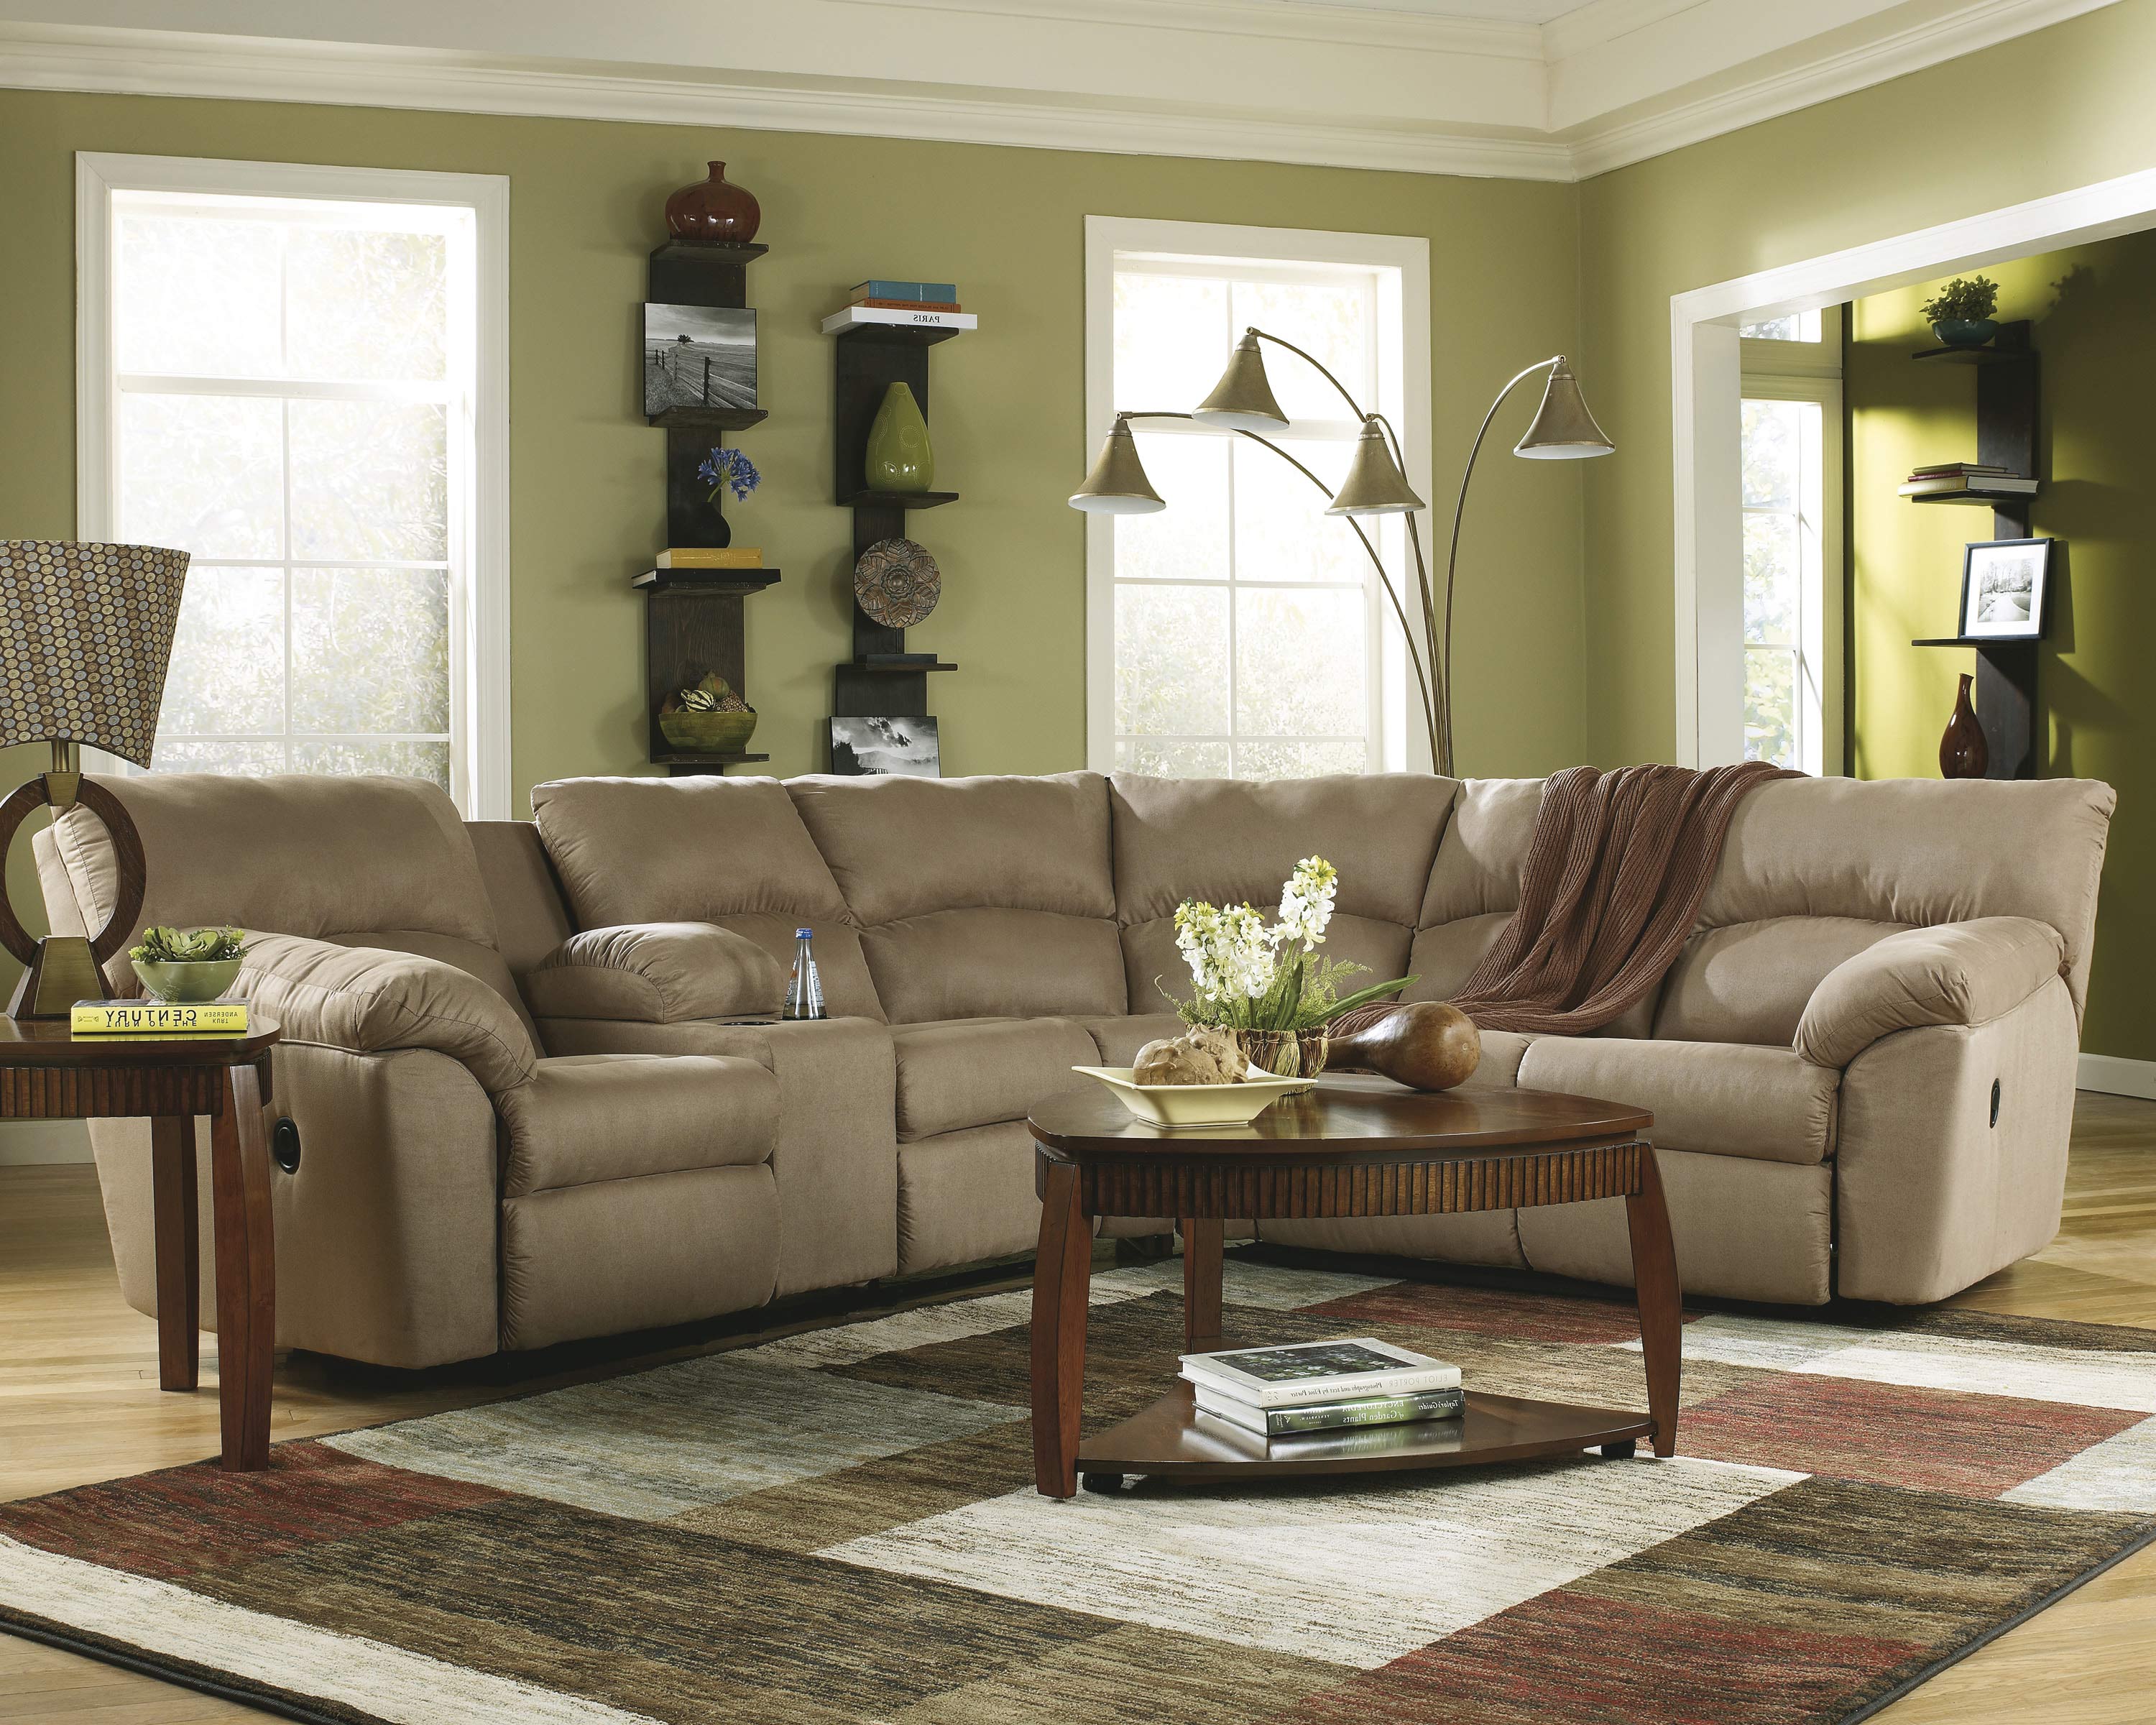 what company makes the best living room furniture - Furniture Ideas